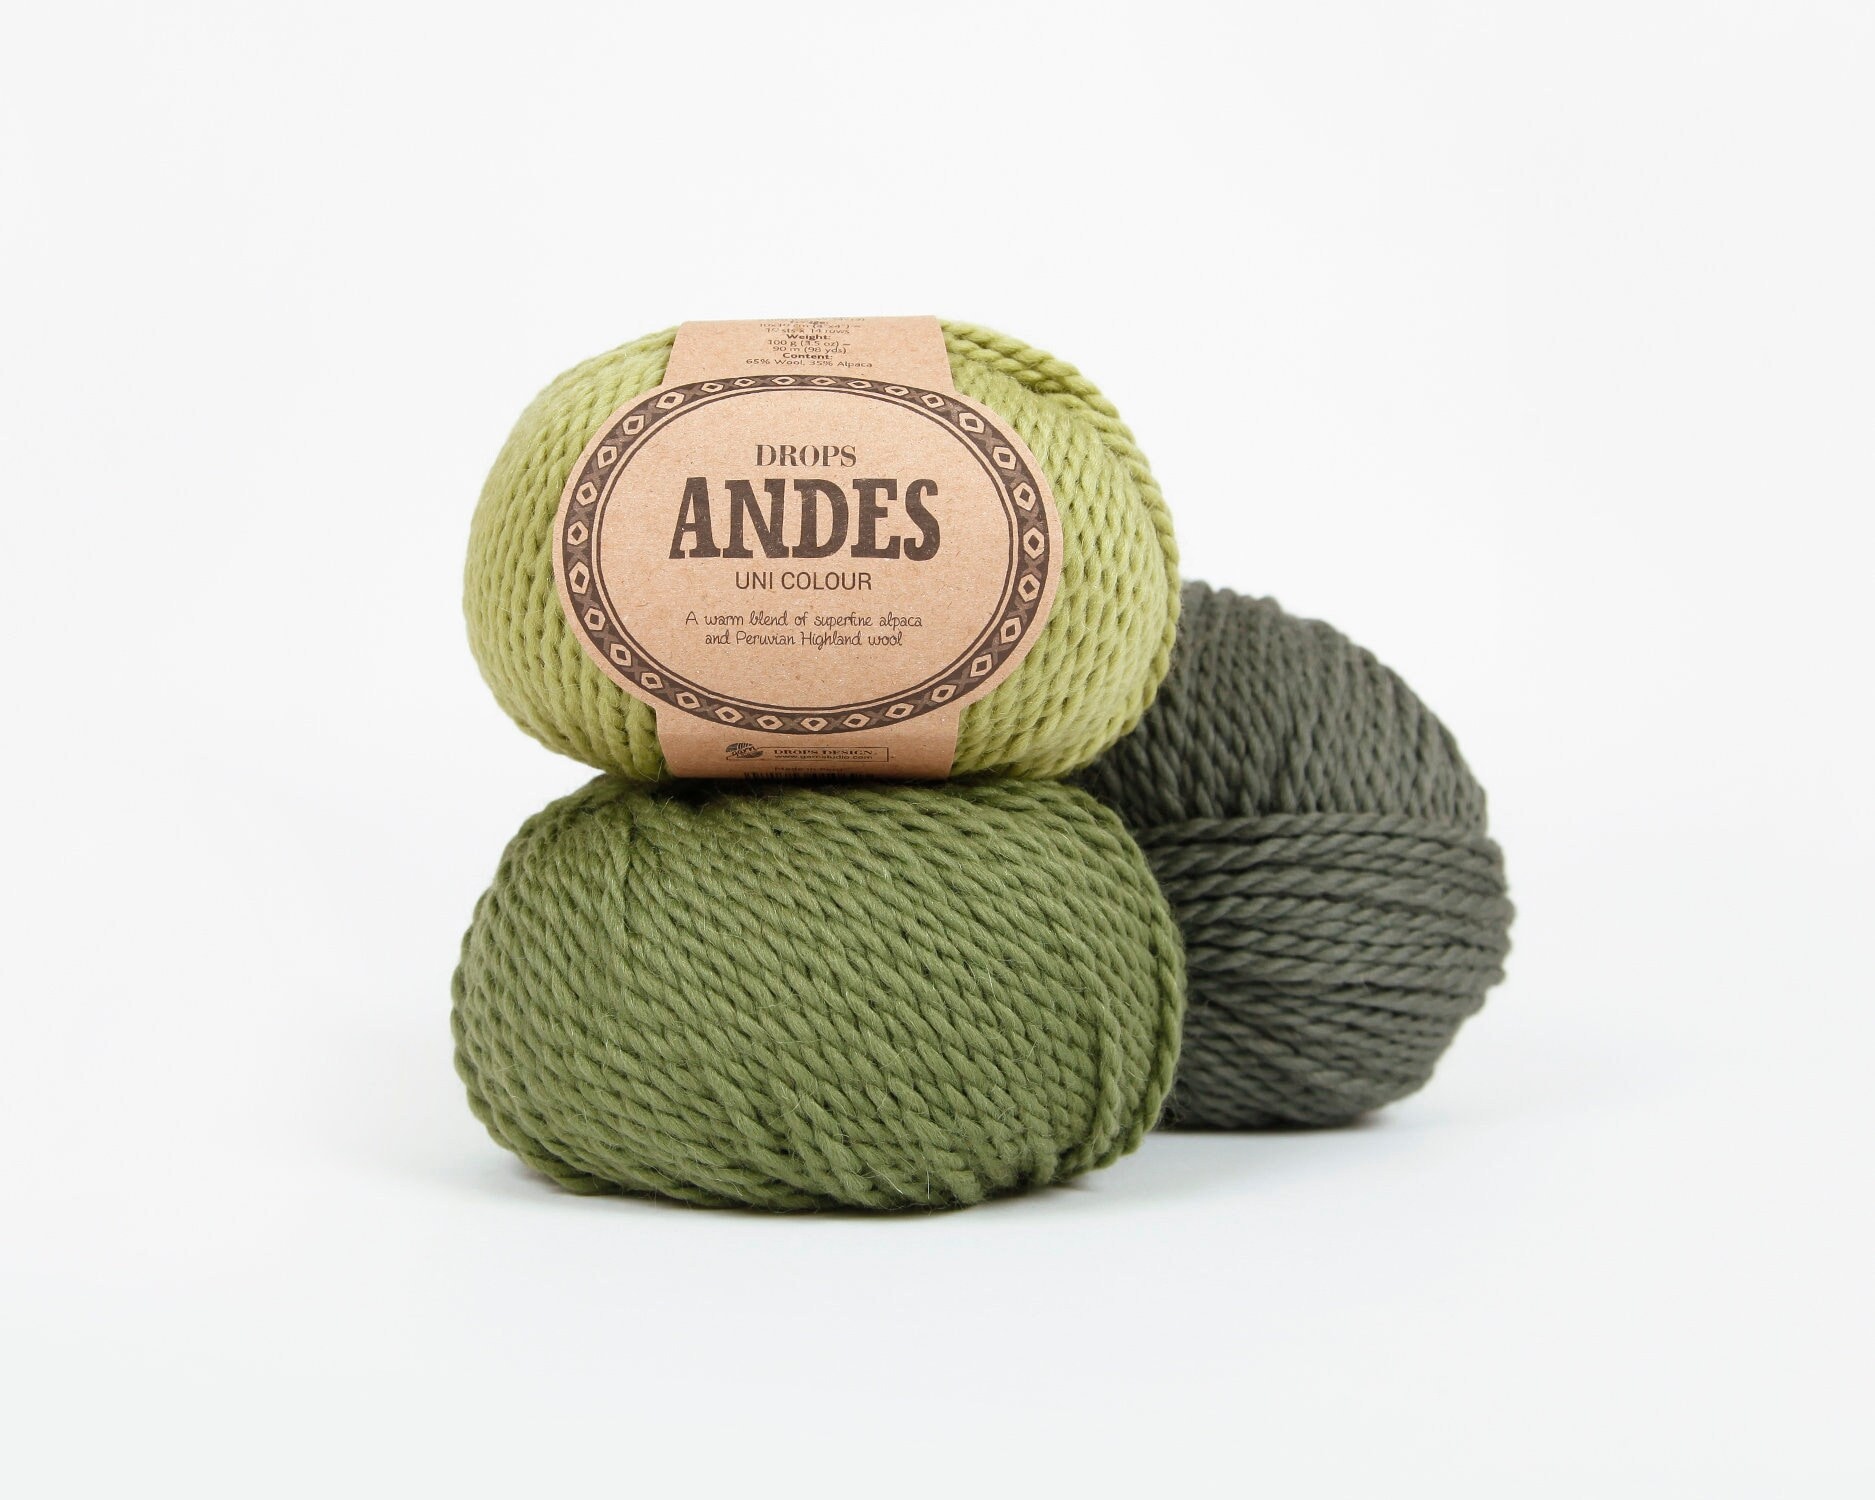 Wool of the Andes Roving